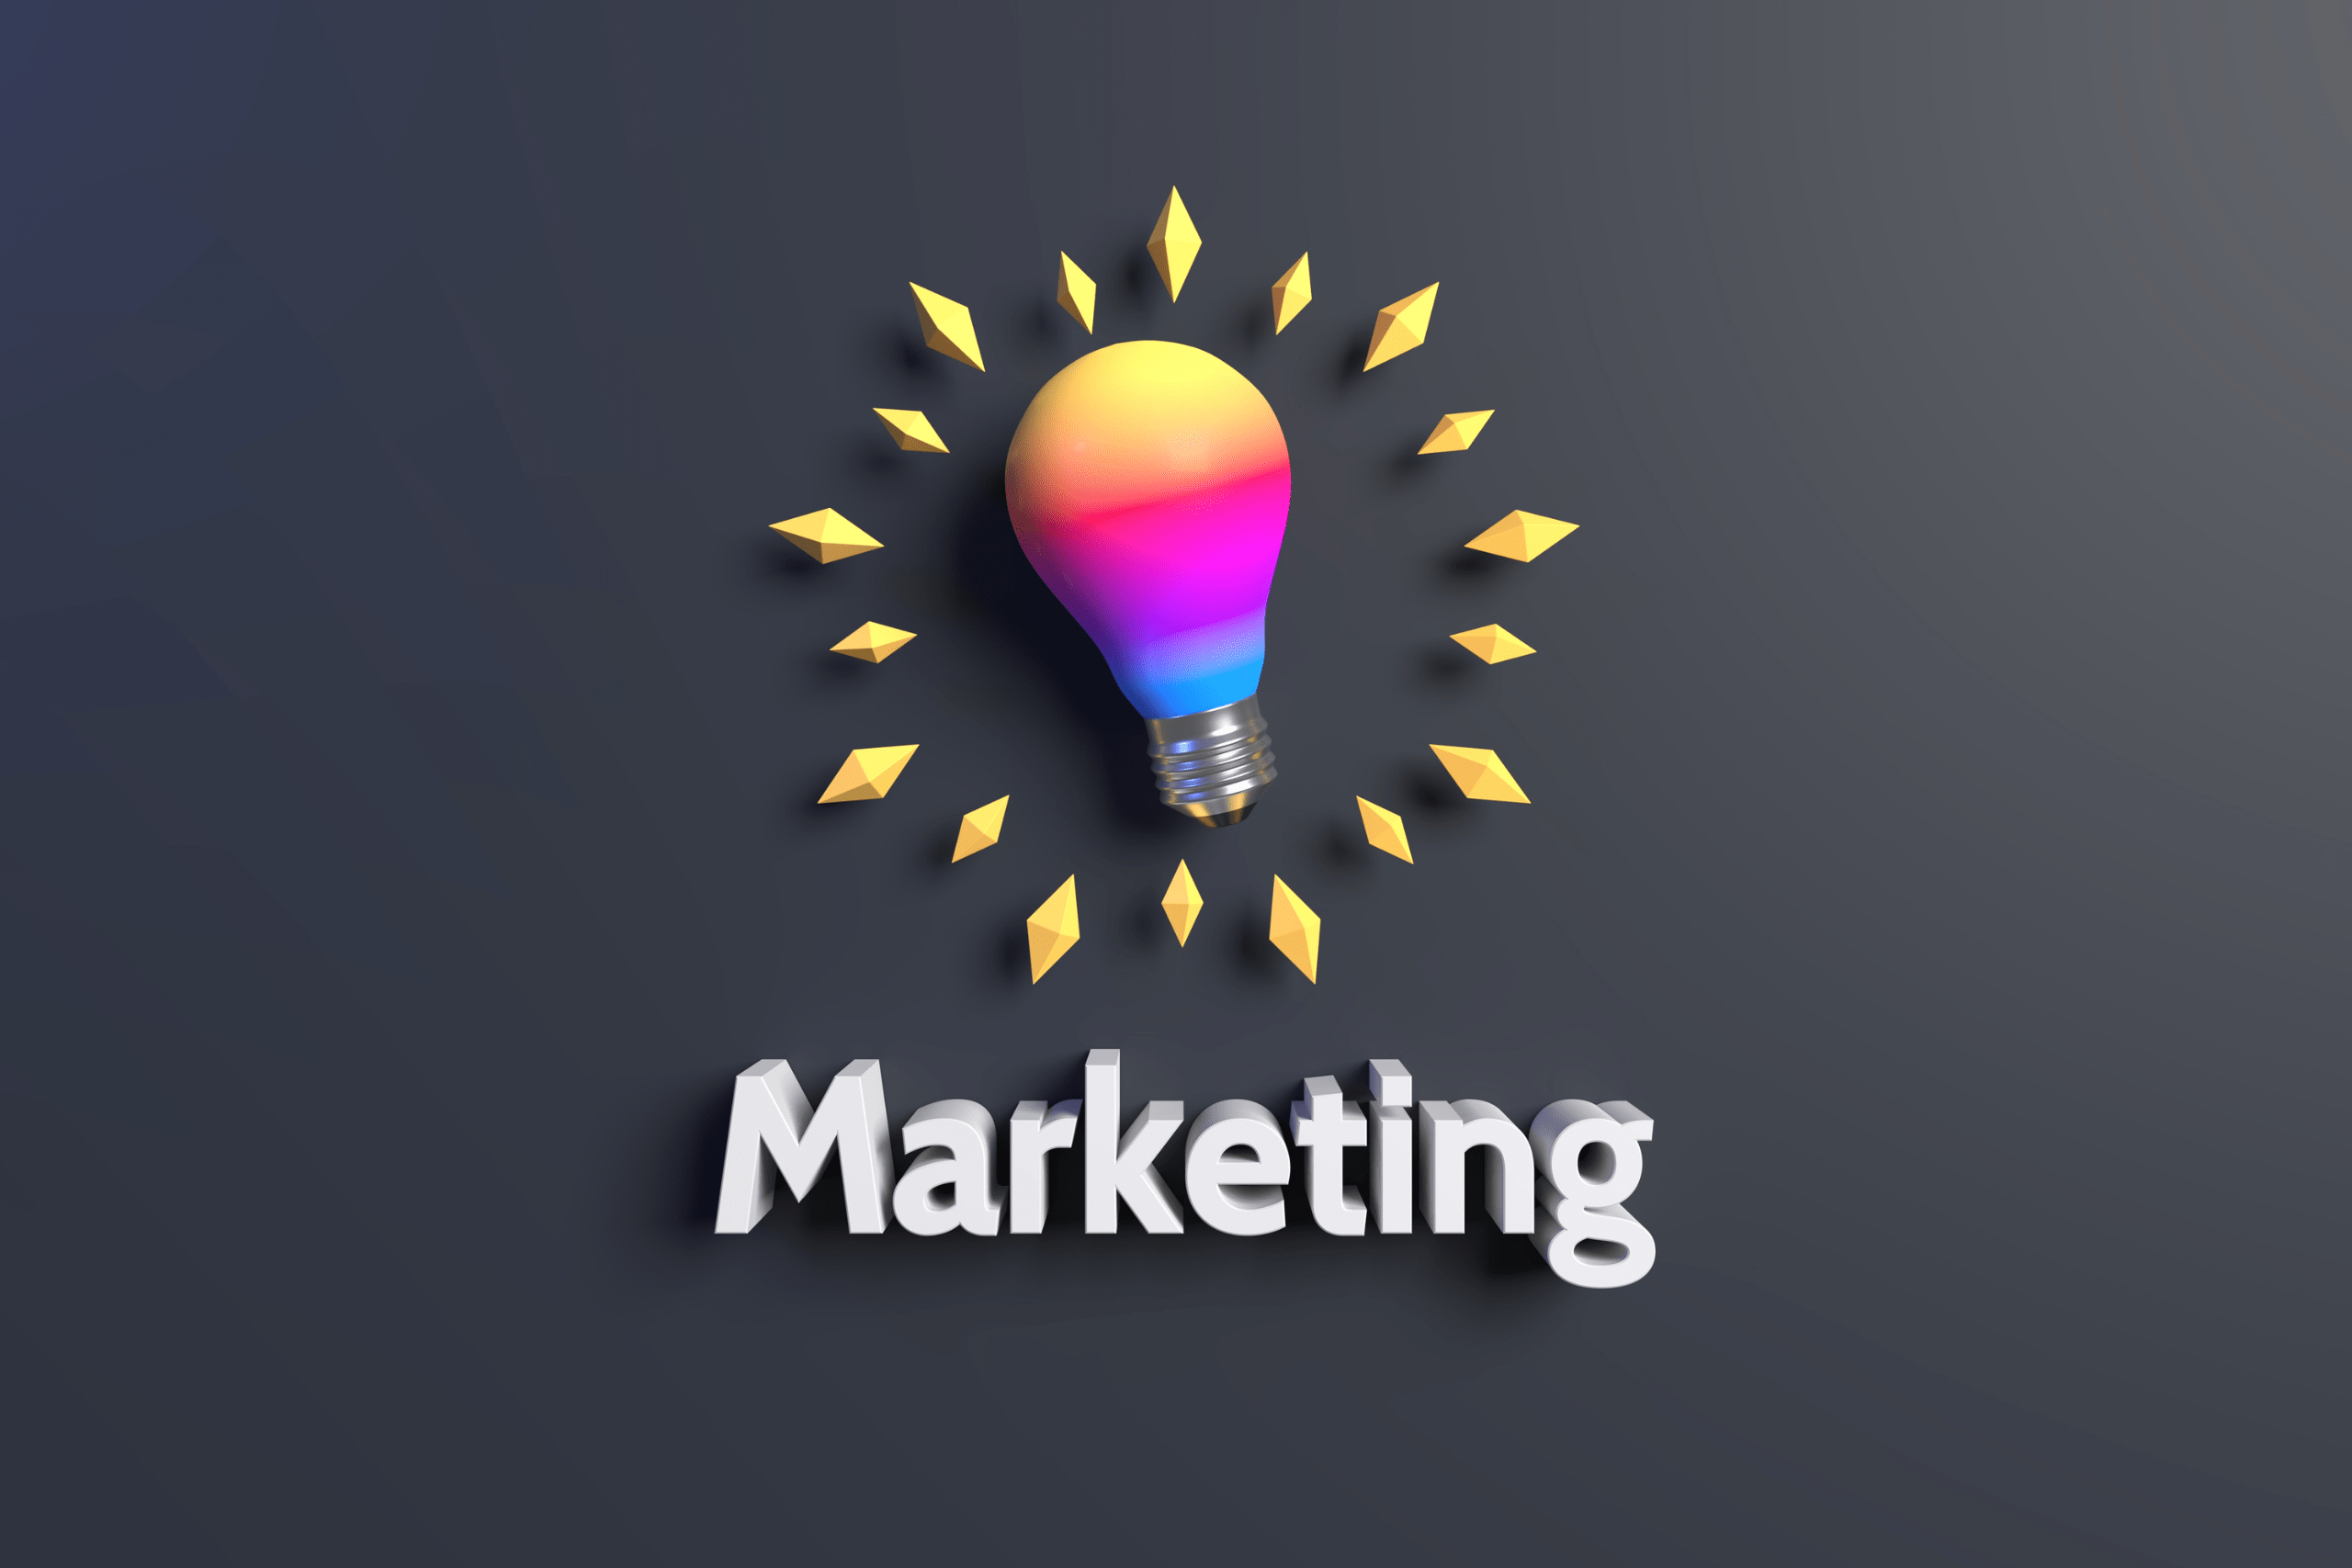 Digital marketing company in Essex’s guide to a successful marketing strategy